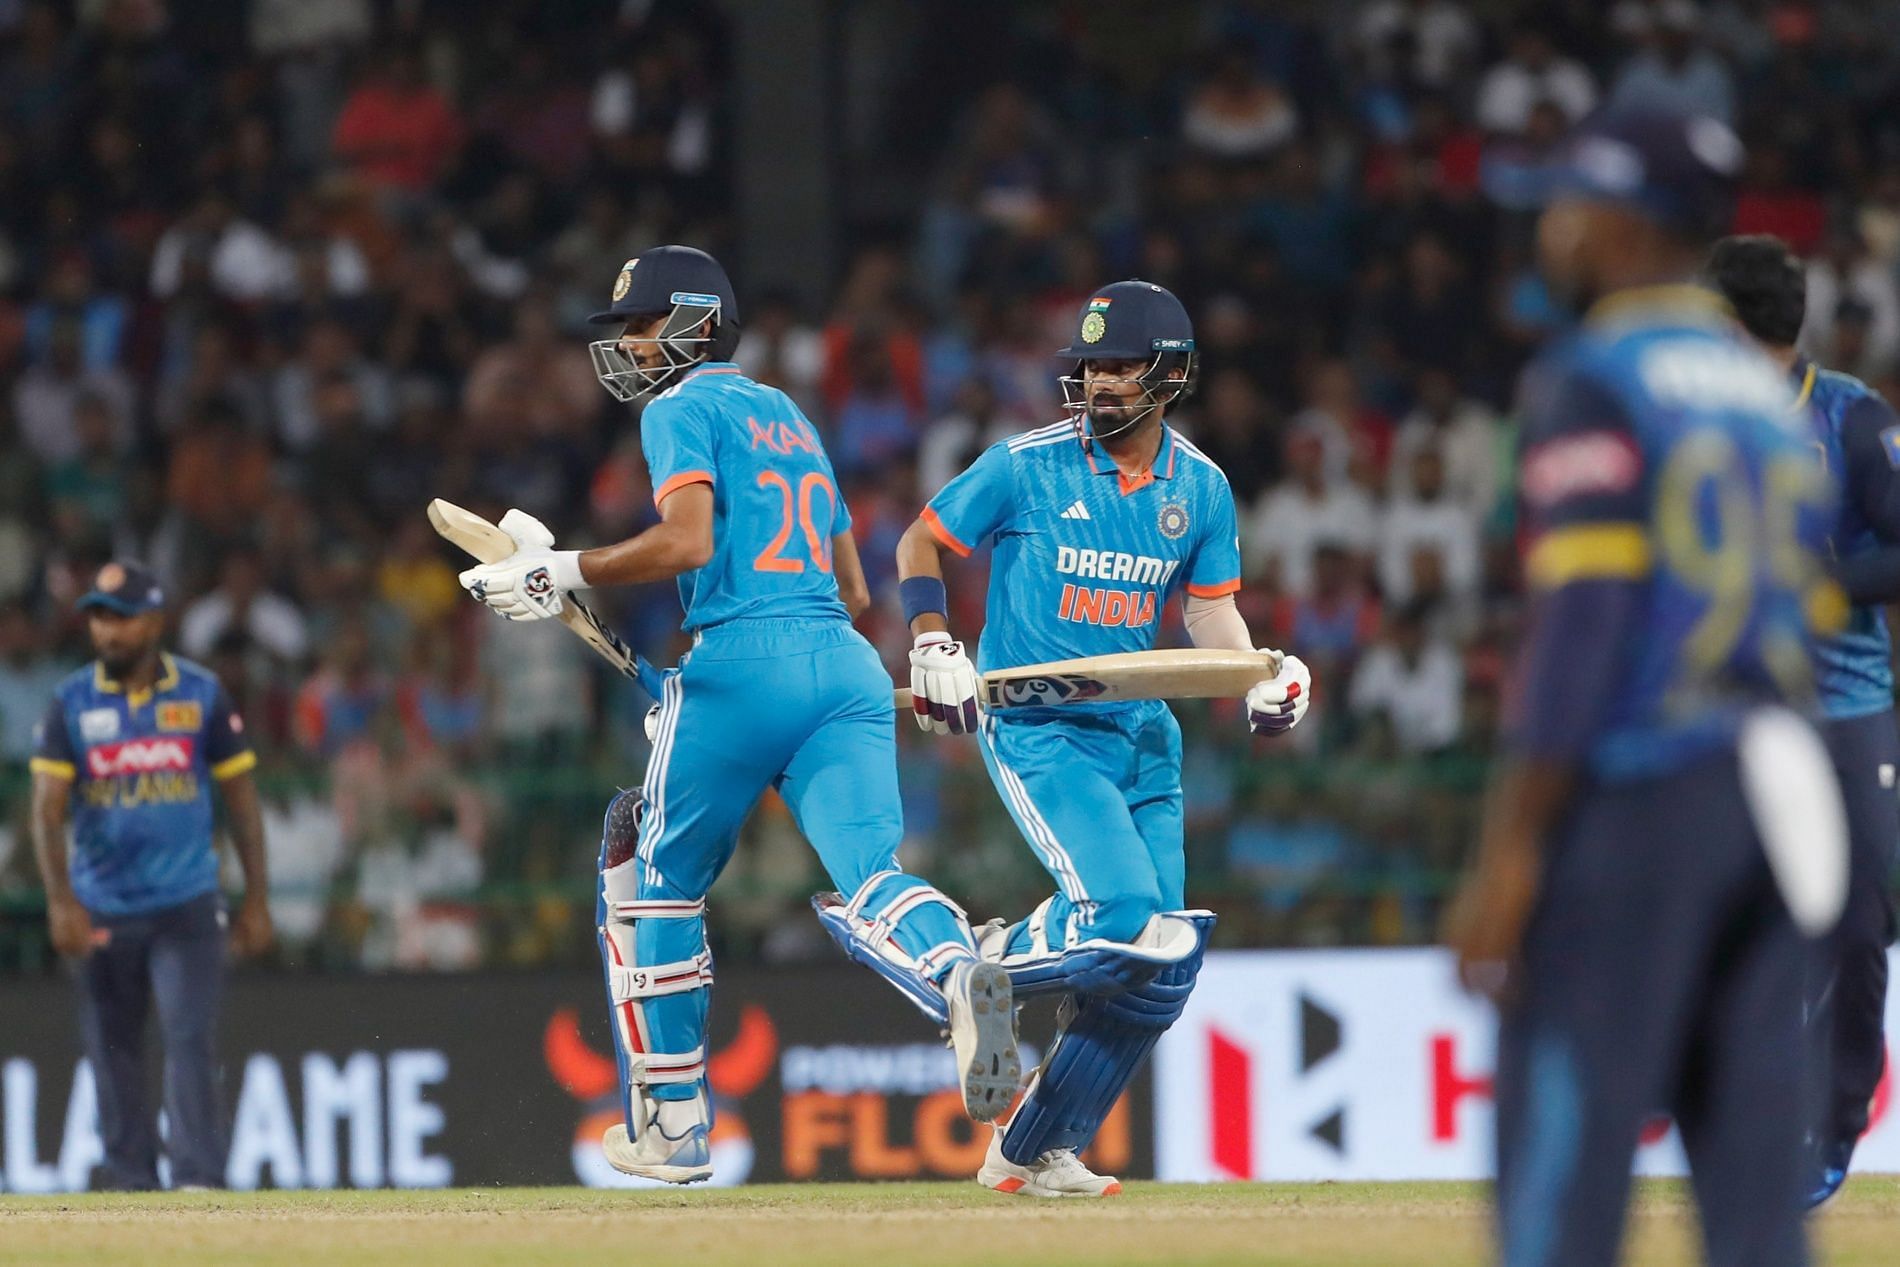 When is Team India's next match in the ODI series against Sri Lanka?